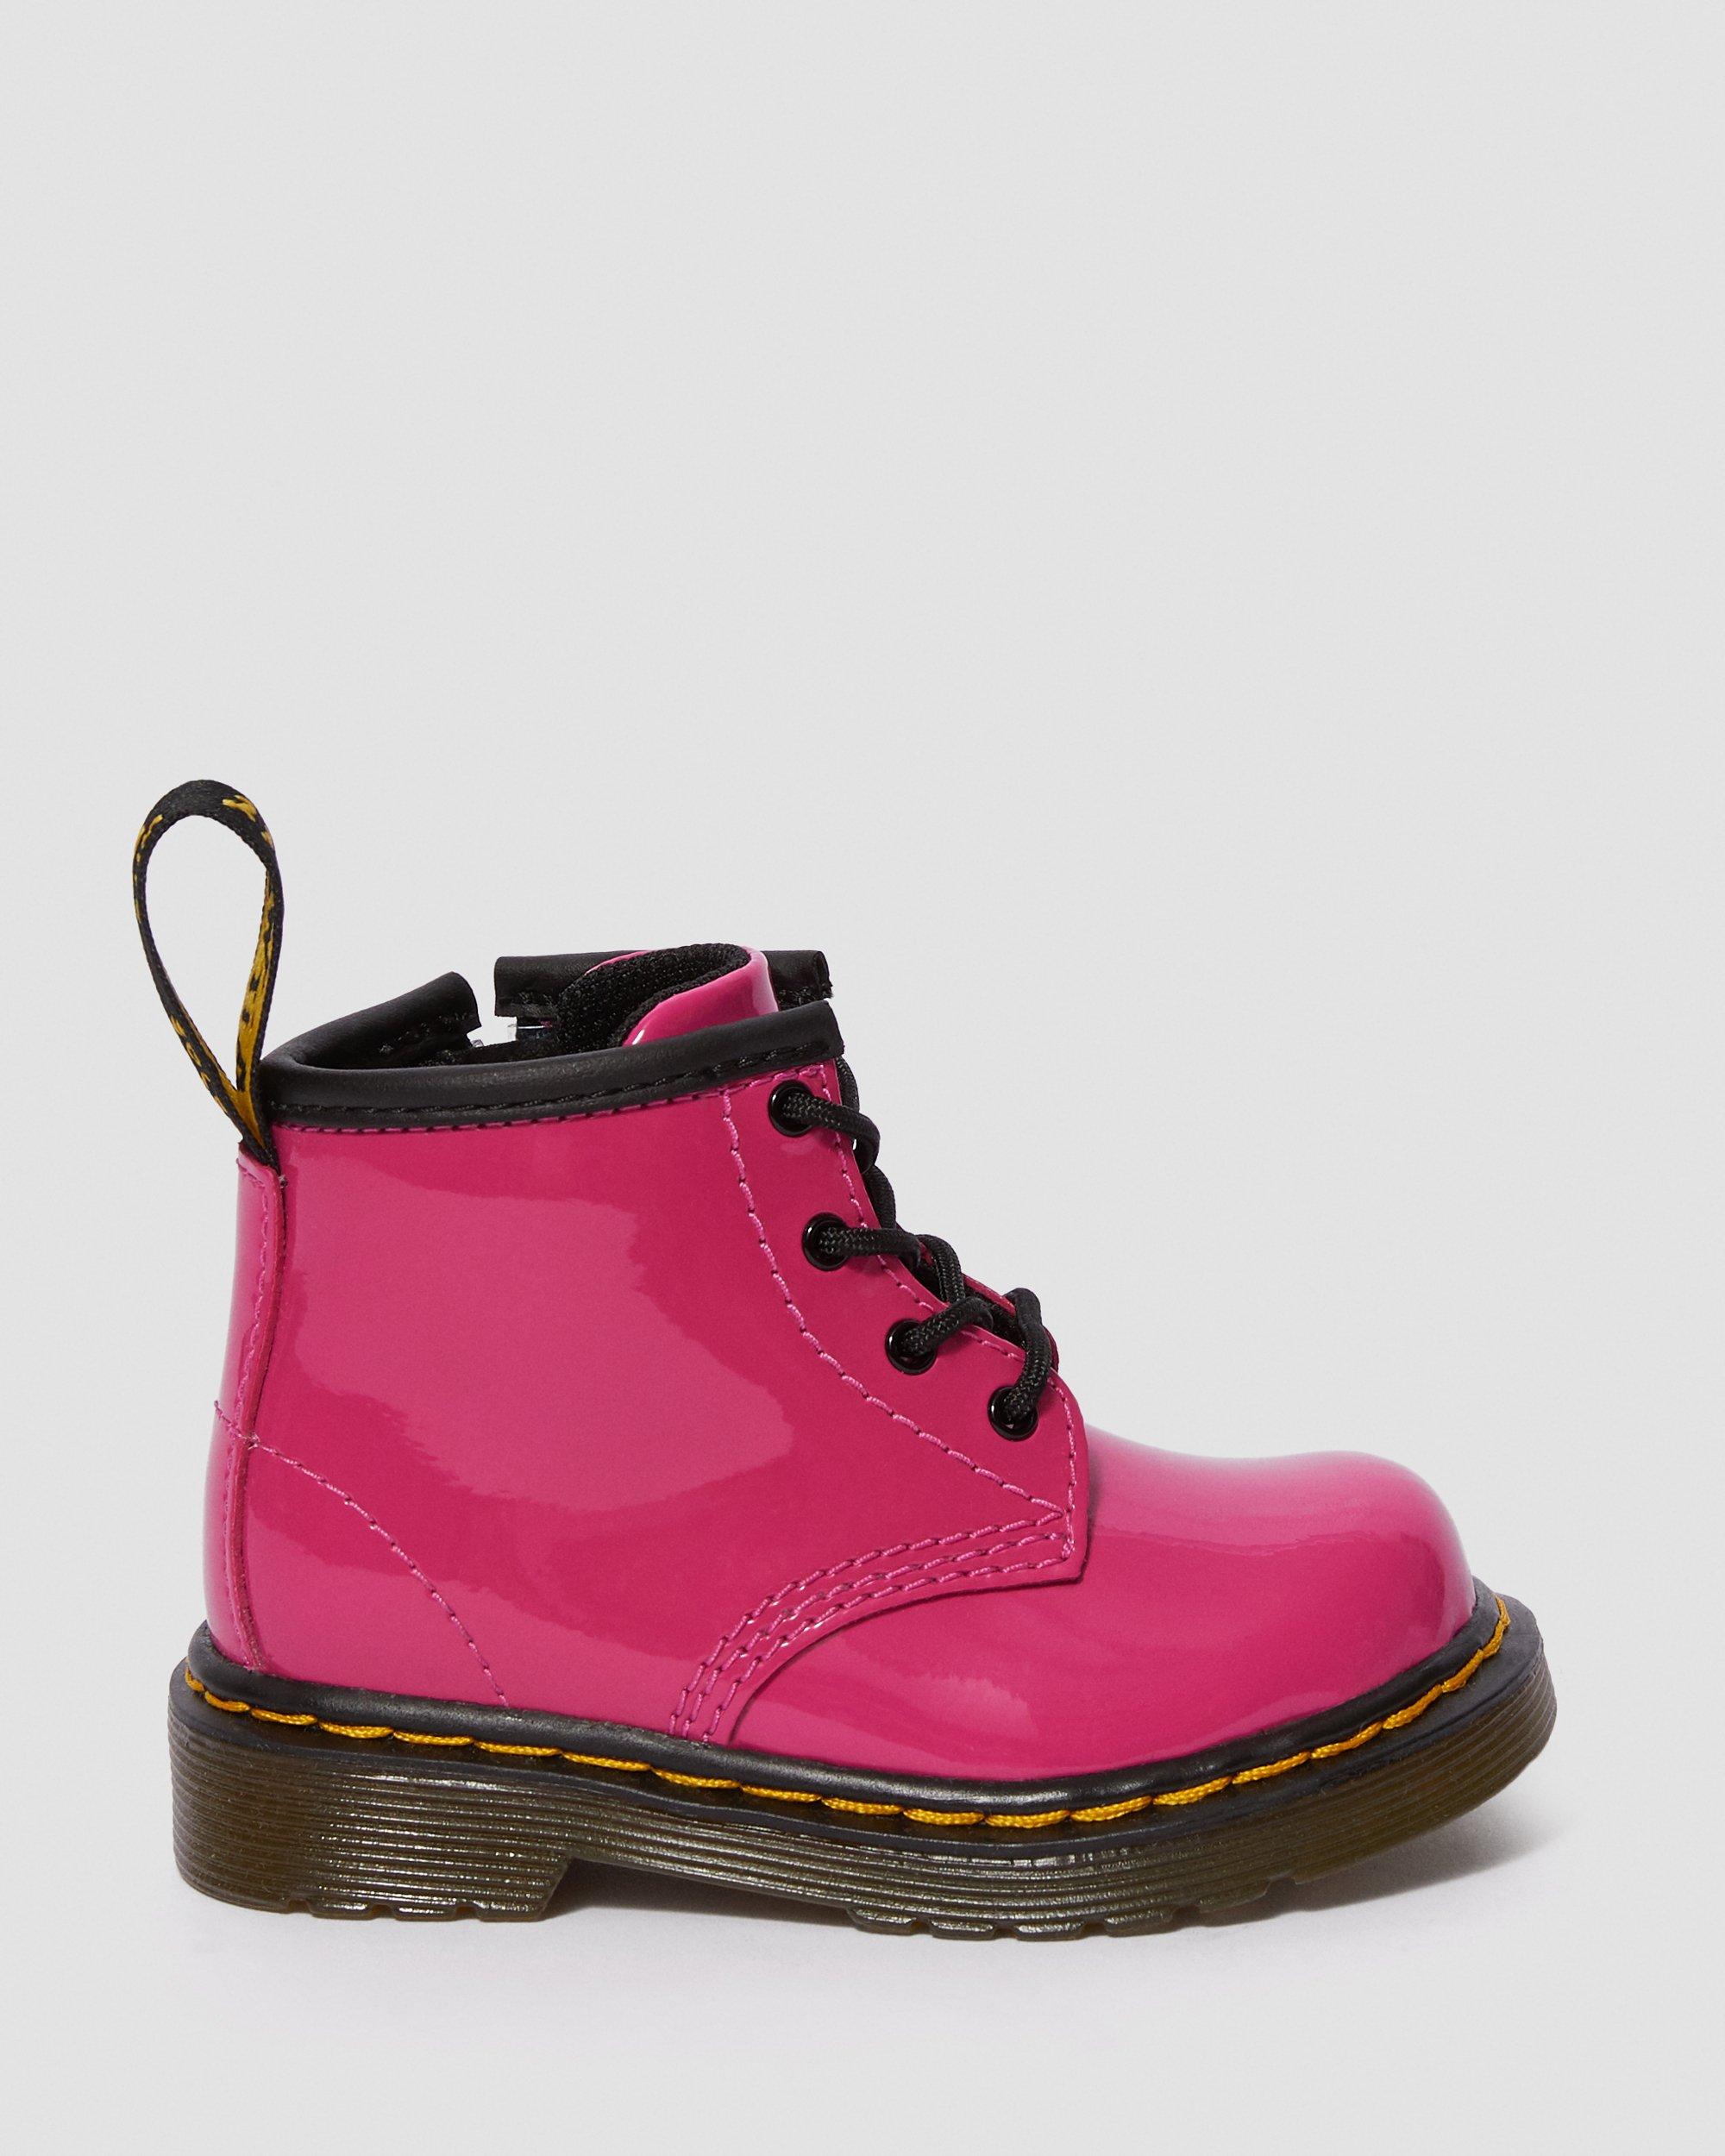 Infant 1460 Patent Leather Lace Up Boots in Hot Pink | Dr. Martens